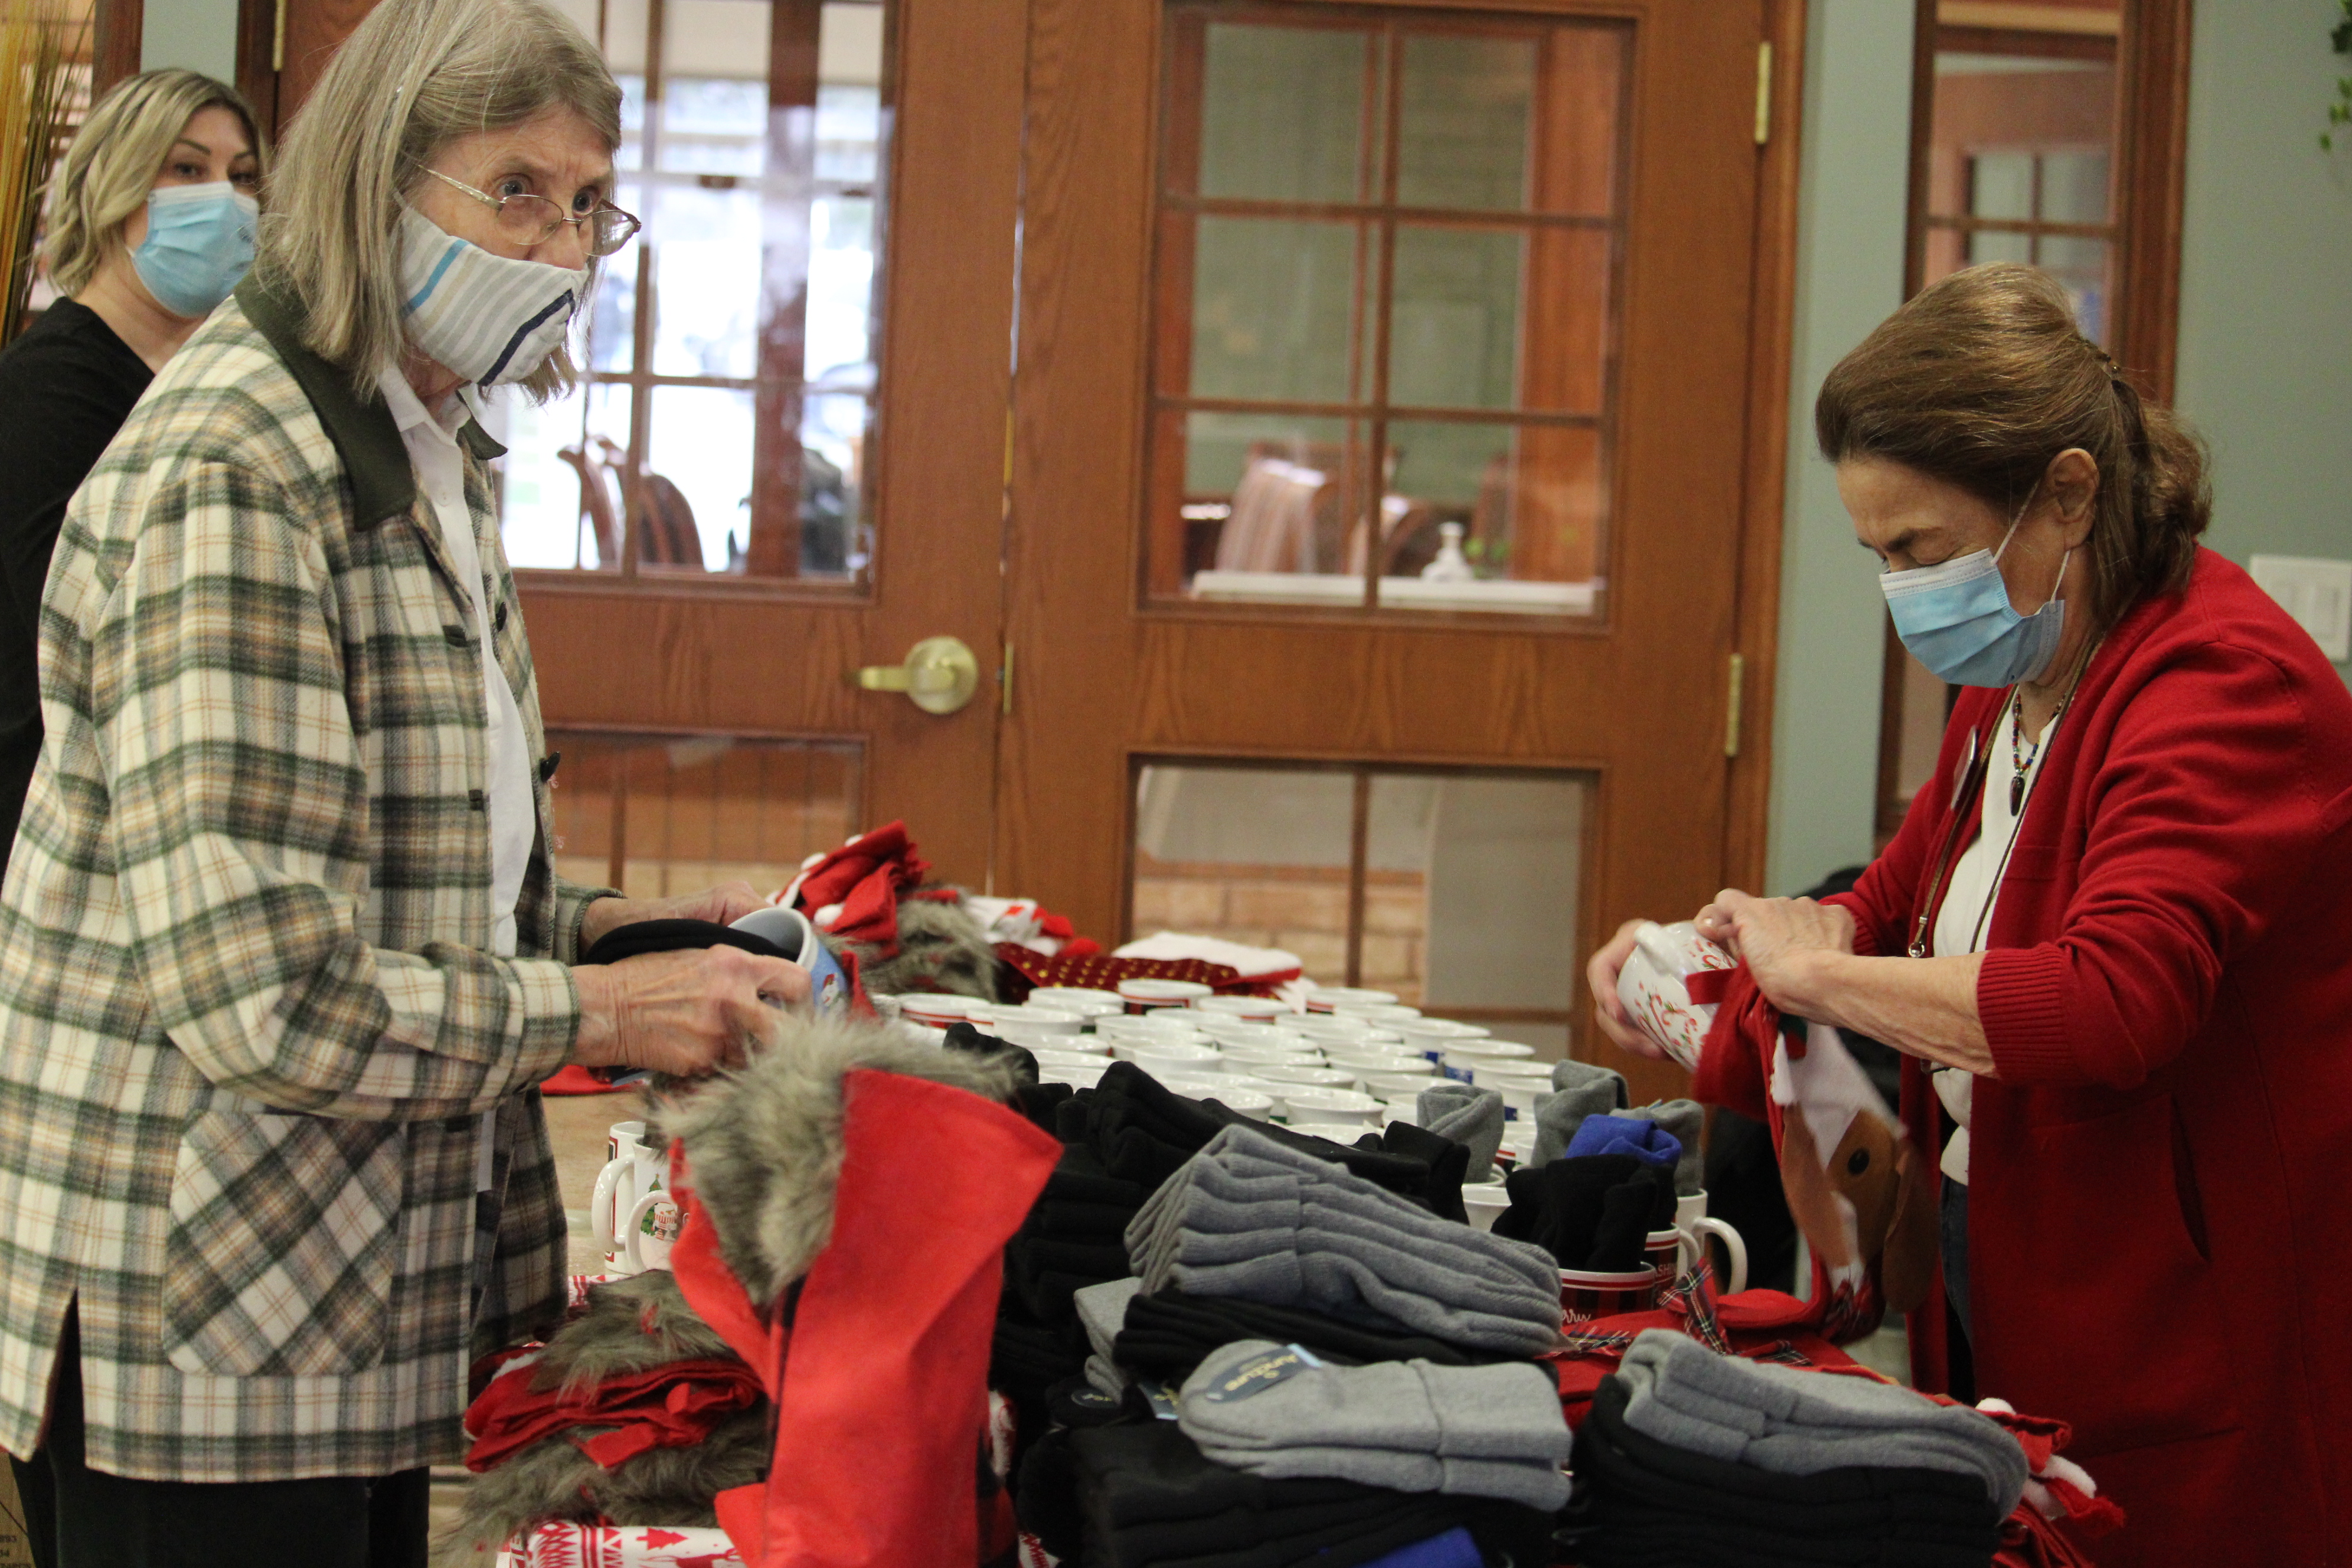 Residents at The Village of Wentworth Heights stuff stockings for those in hospital on Christmas